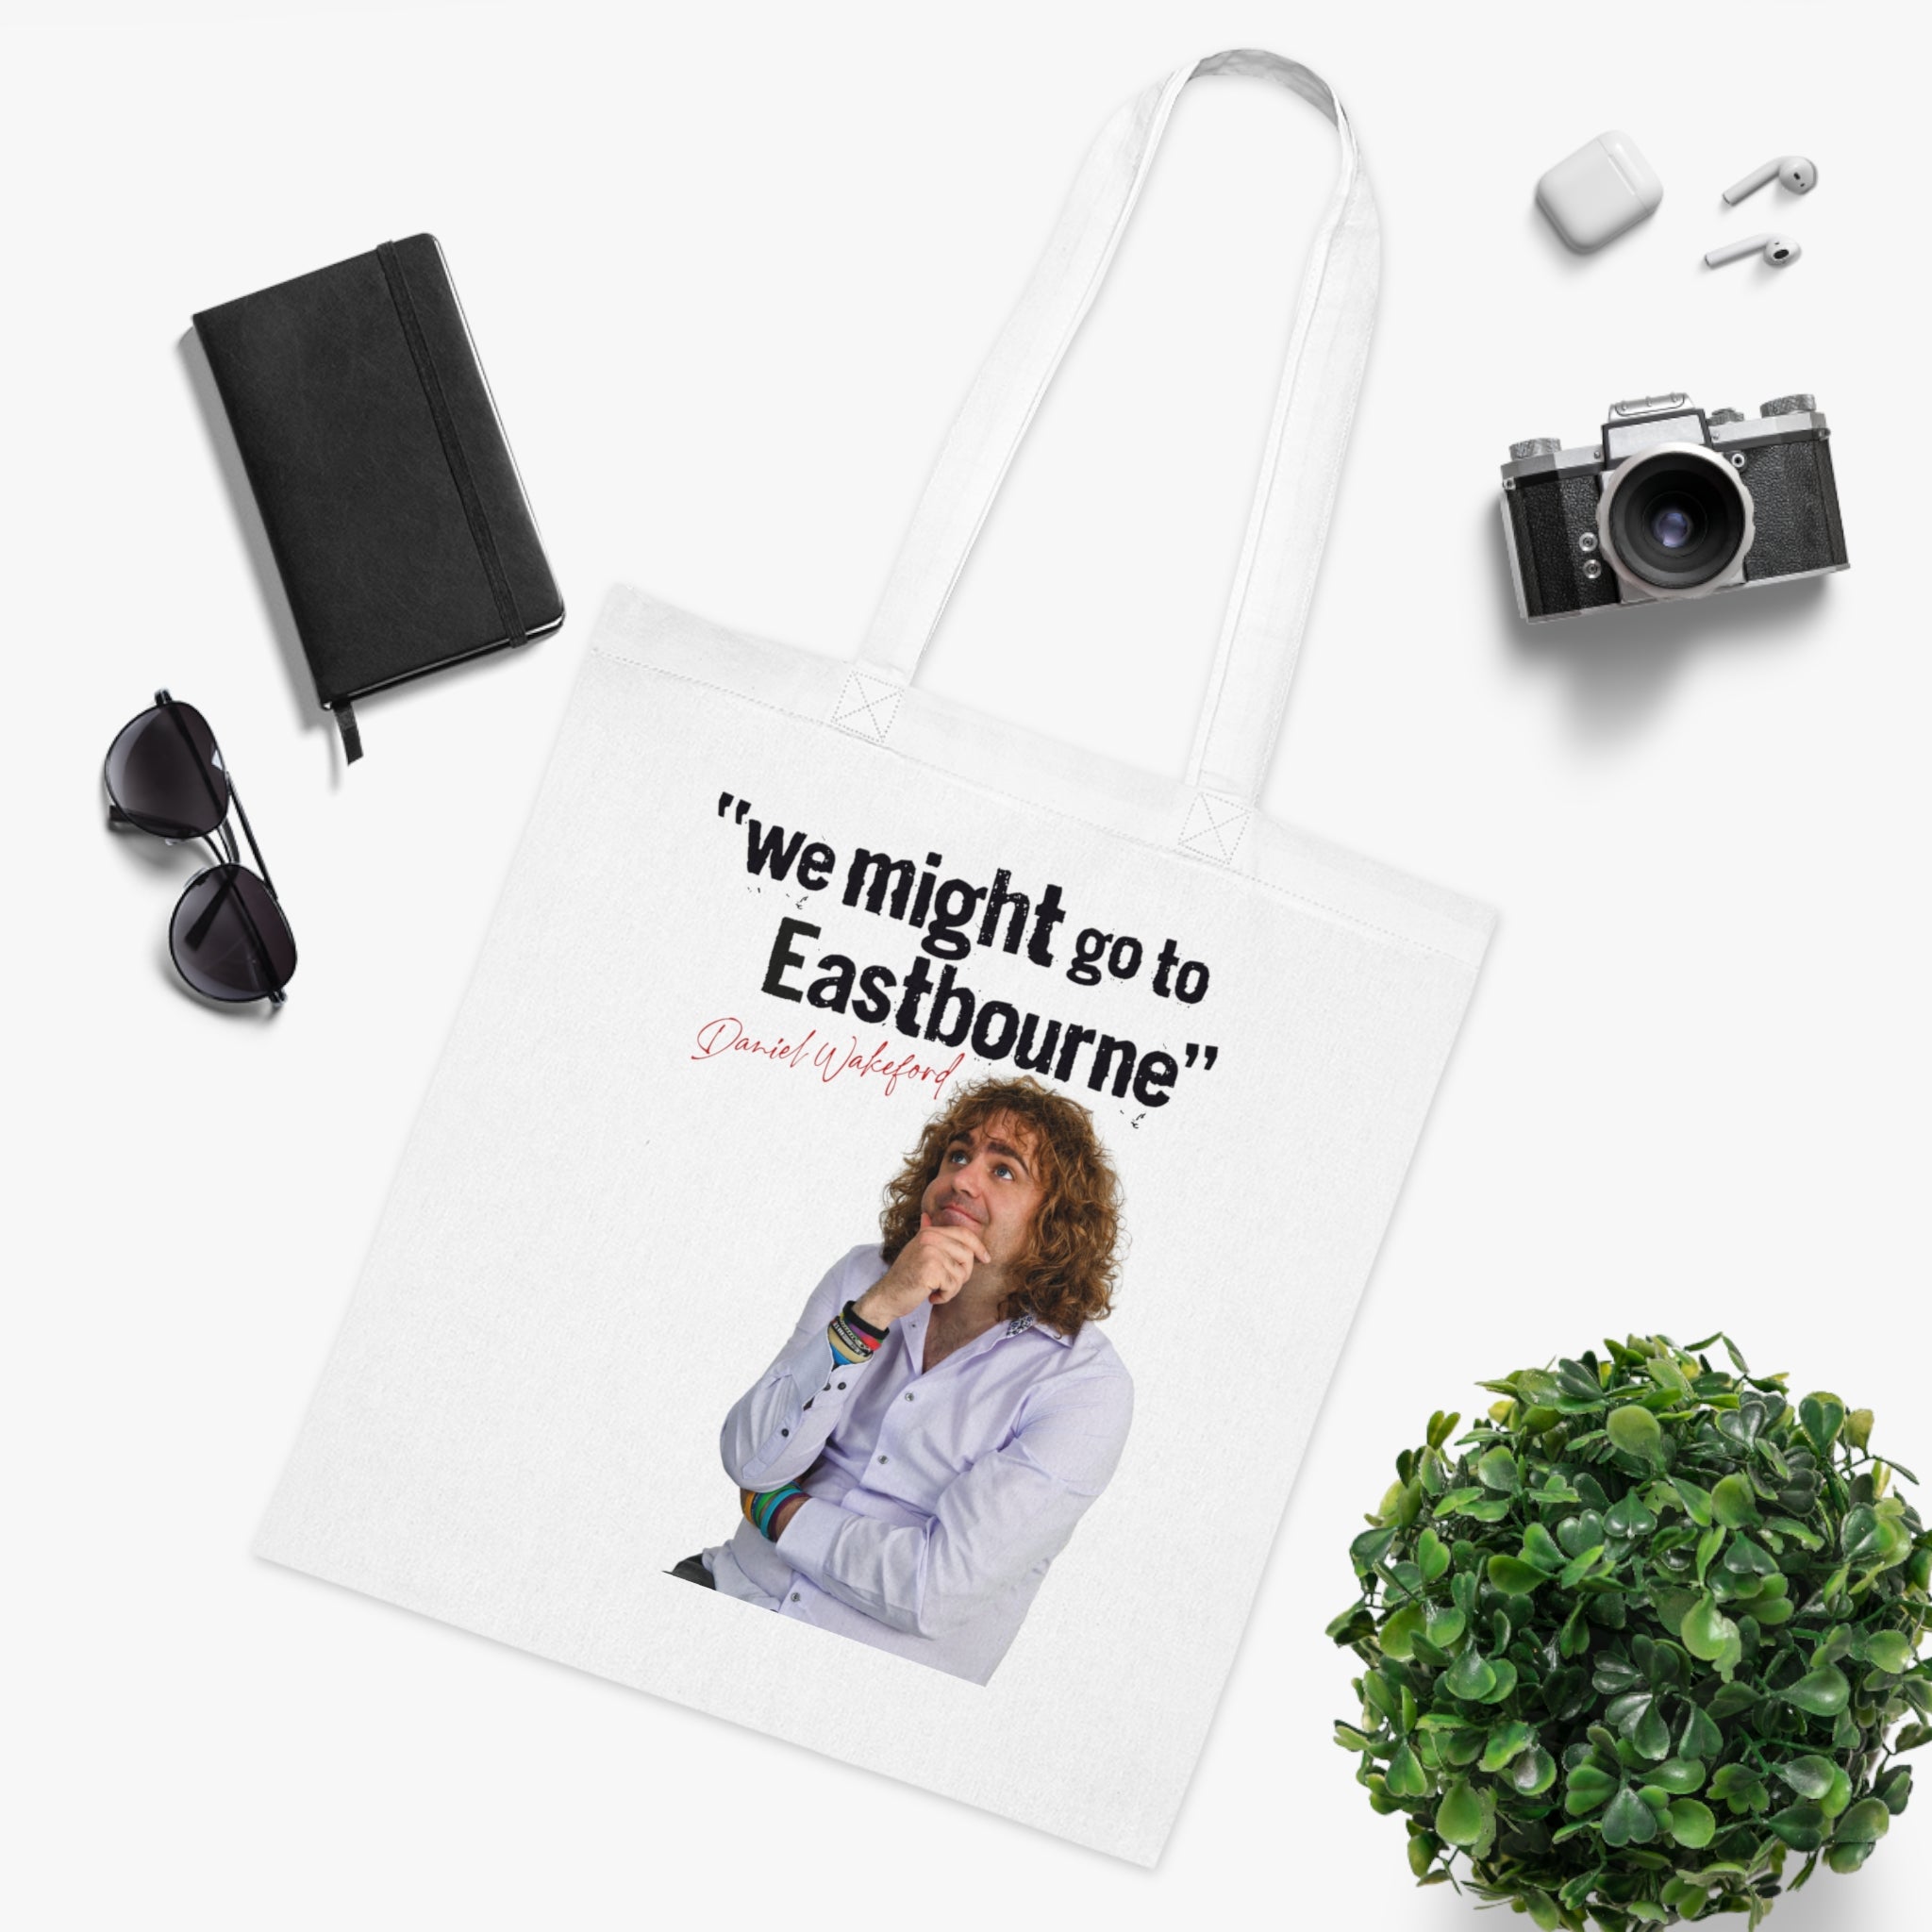 “We might go to Eastbourne” Cotton Tote Bag